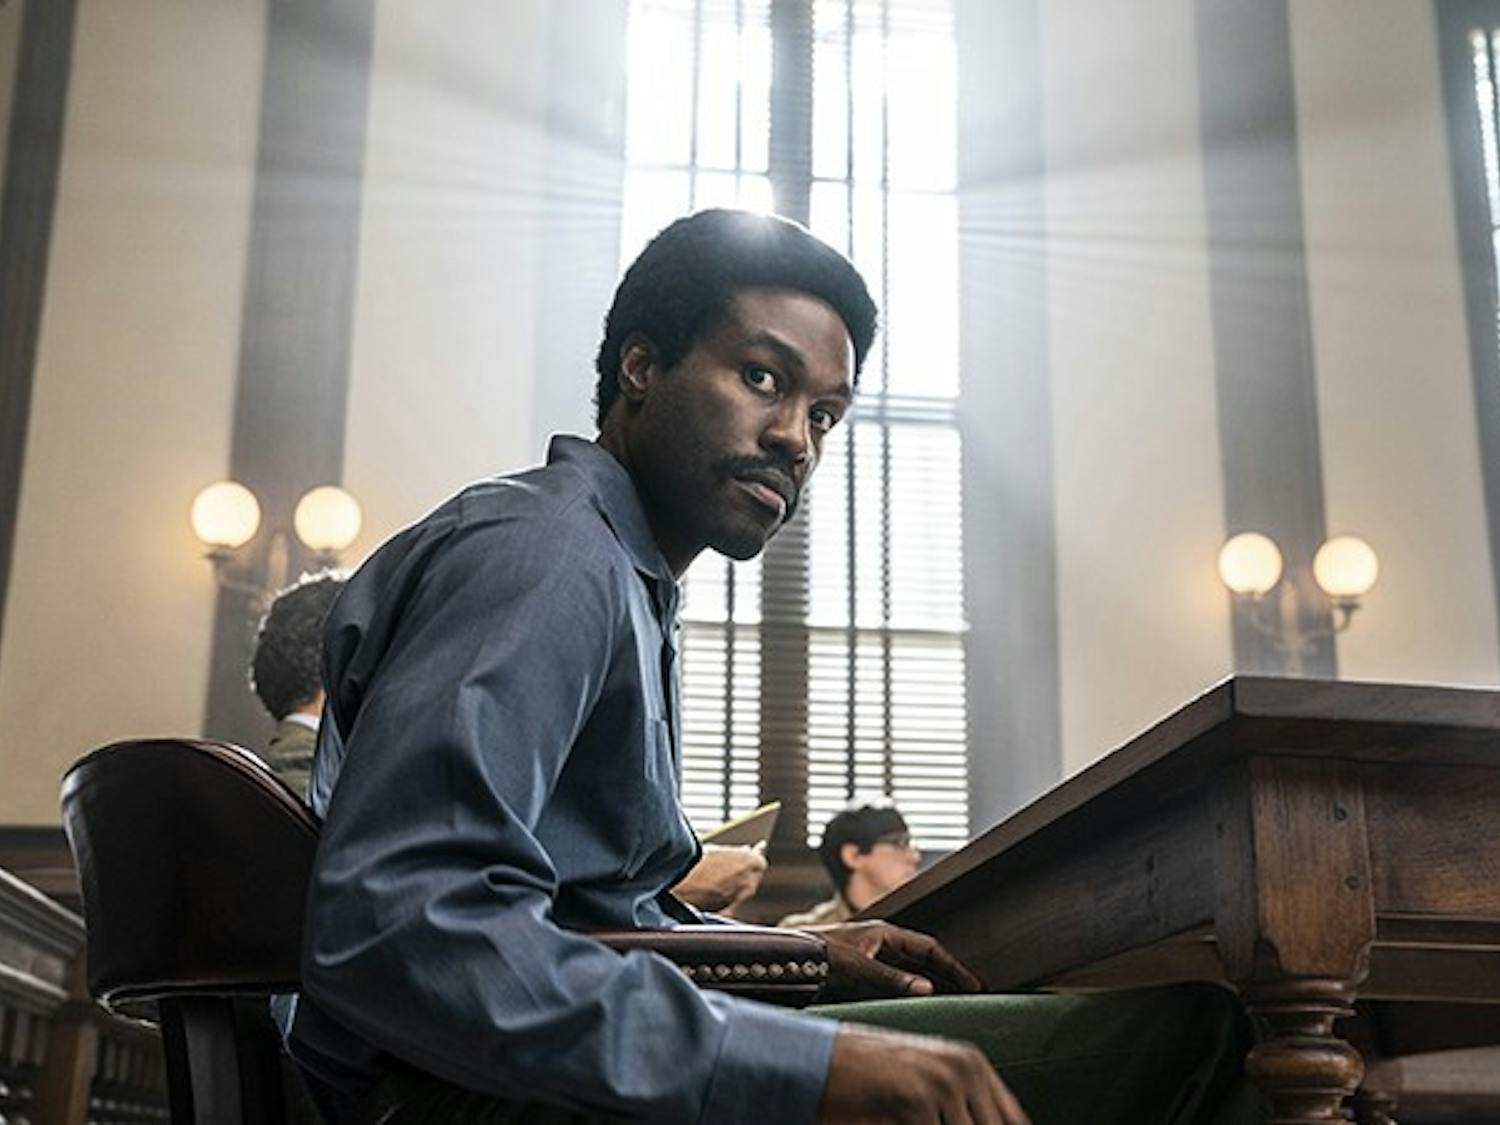 Yahya Abdul-Mateen II plays Bobby Seale in the new movie “The Trial of the Chicago 7,” which premiered on Netflix on Oct. 16, 2020.